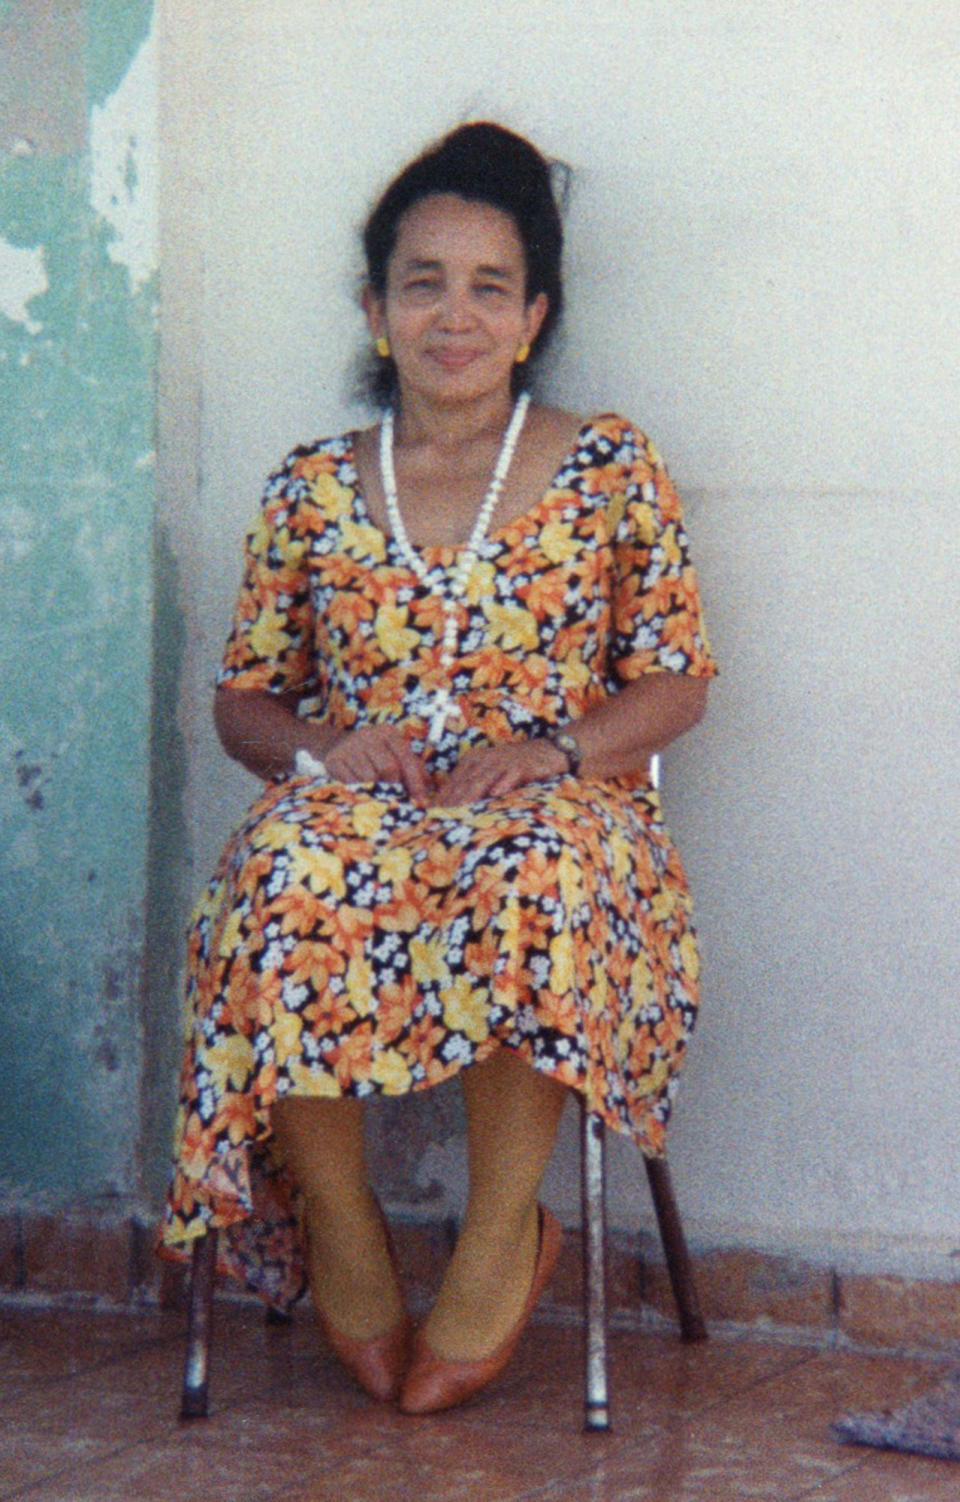 This undated family photo shows Carmen Tanco during a visit to Puerto Rico. Tanco, 67, a dental hygienist, was killed Wednesday, March 12, 2014 in gas leak-triggered explosion that reduced two buildings in the East Harlem neighborhood of New York to a pile of smashed bricks, splinters and mangled metal. Rescuers pulled four additional bodies from the rubble Thursday, raising the death toll to at least seven. (AP Photo/Photo provided by family of Carmen Tanco)